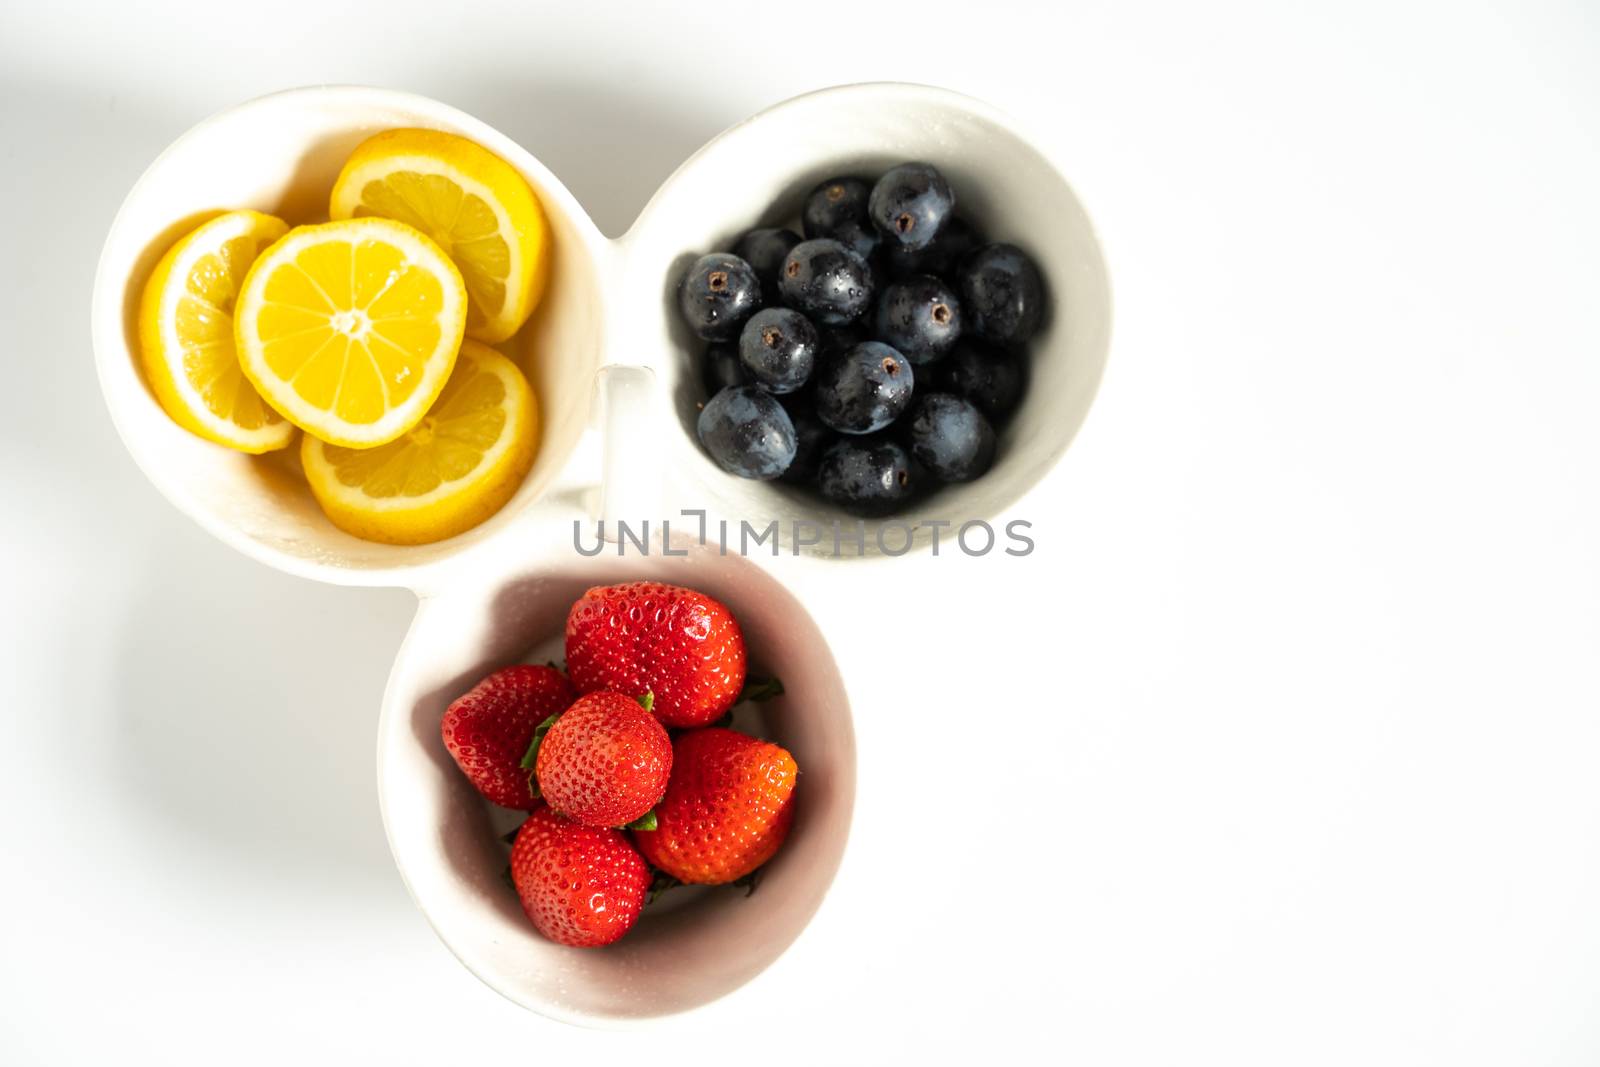 A serving dish filled with strawberries, lemon slices and black grapes against a plain white background